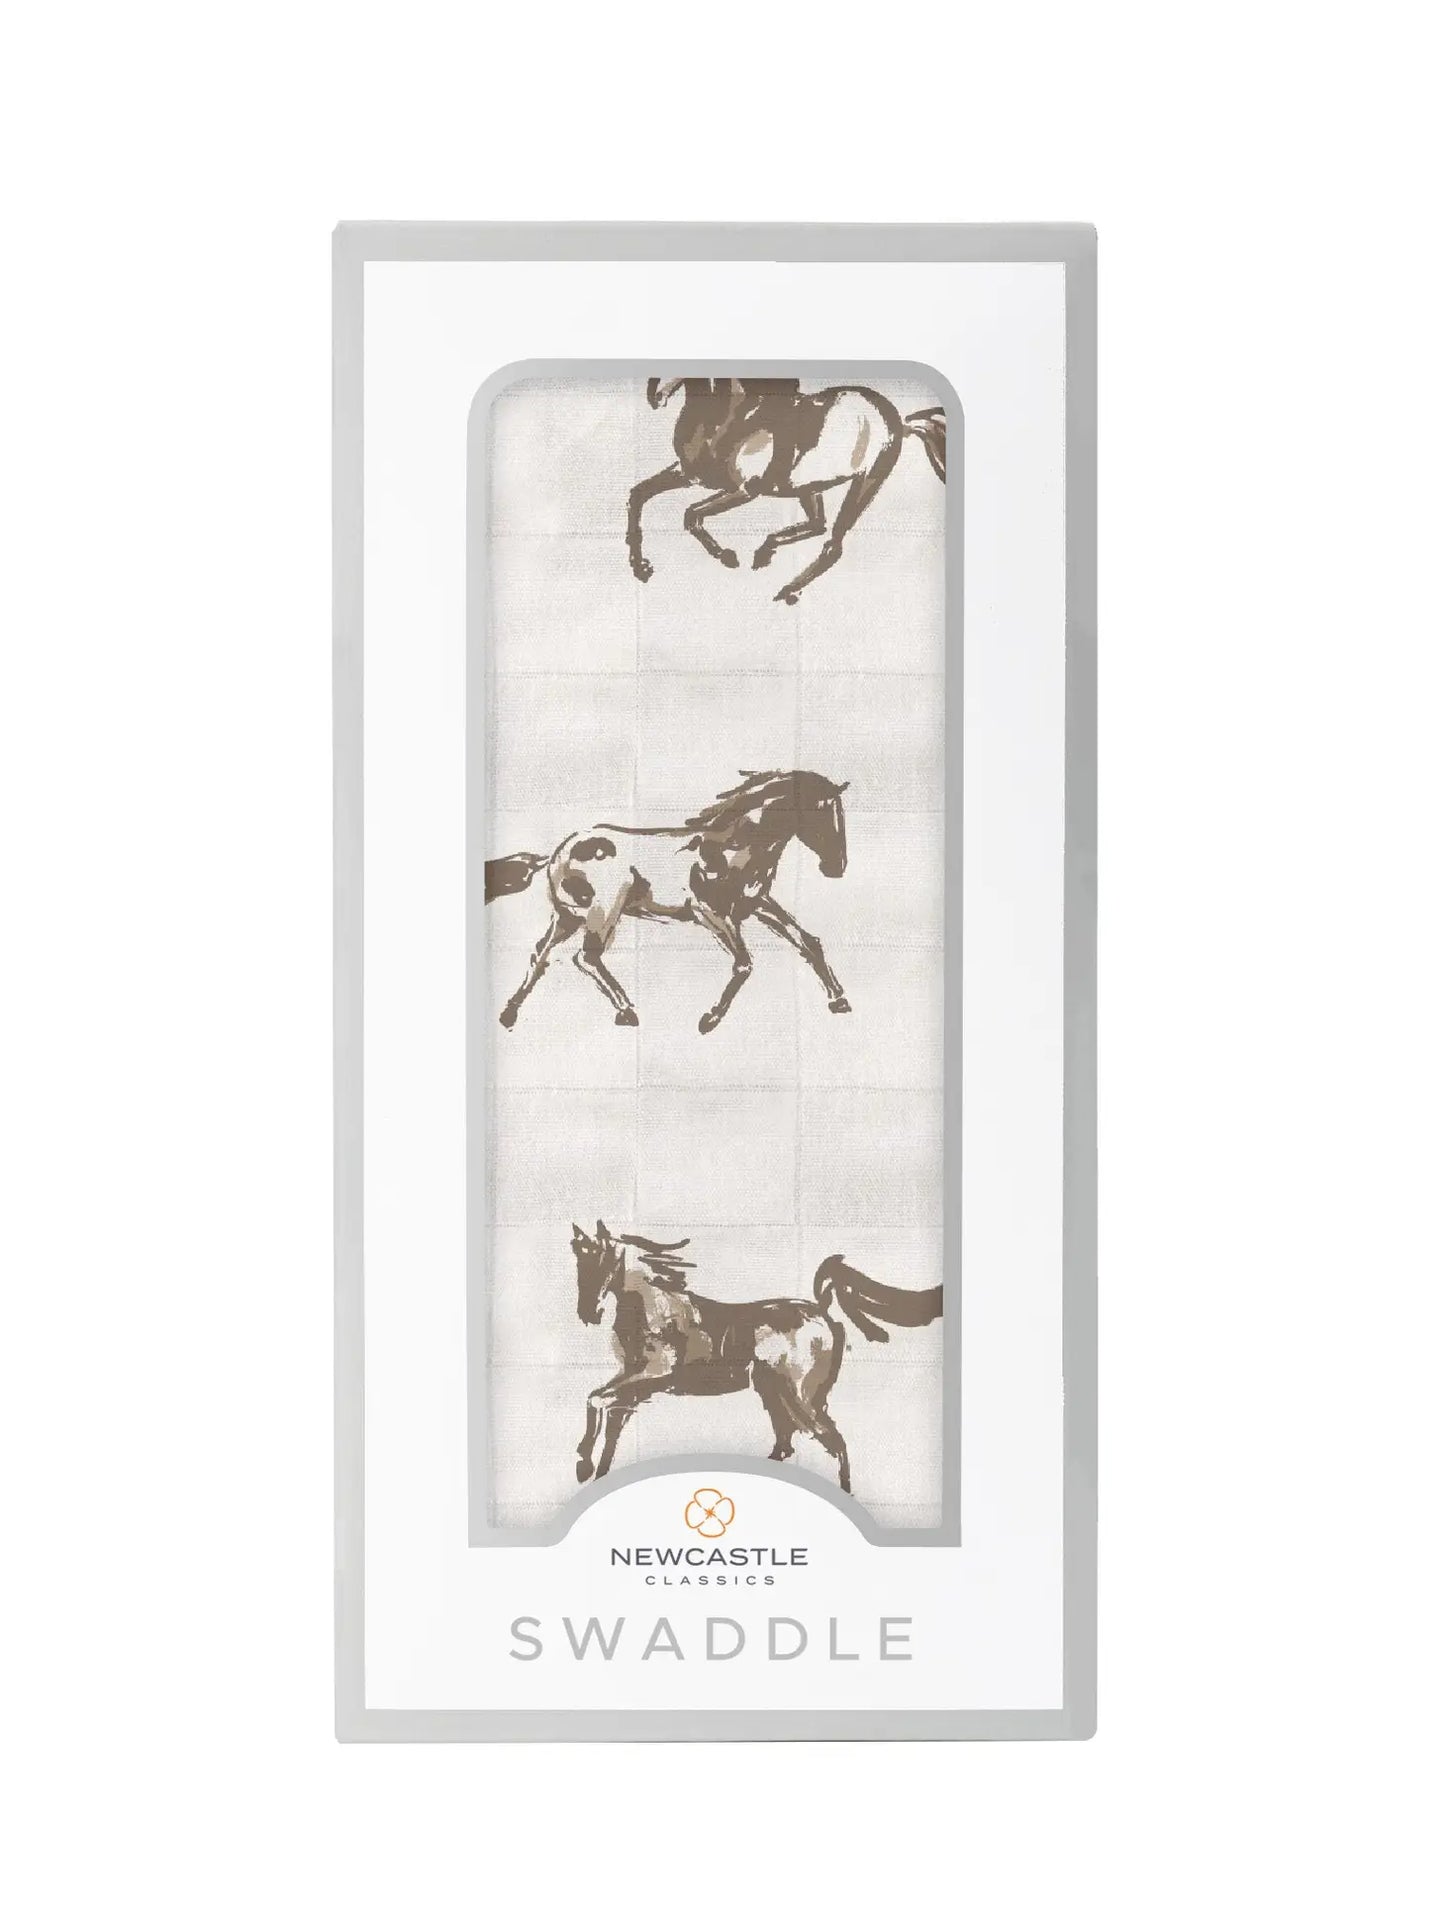 galloping horses swaddle